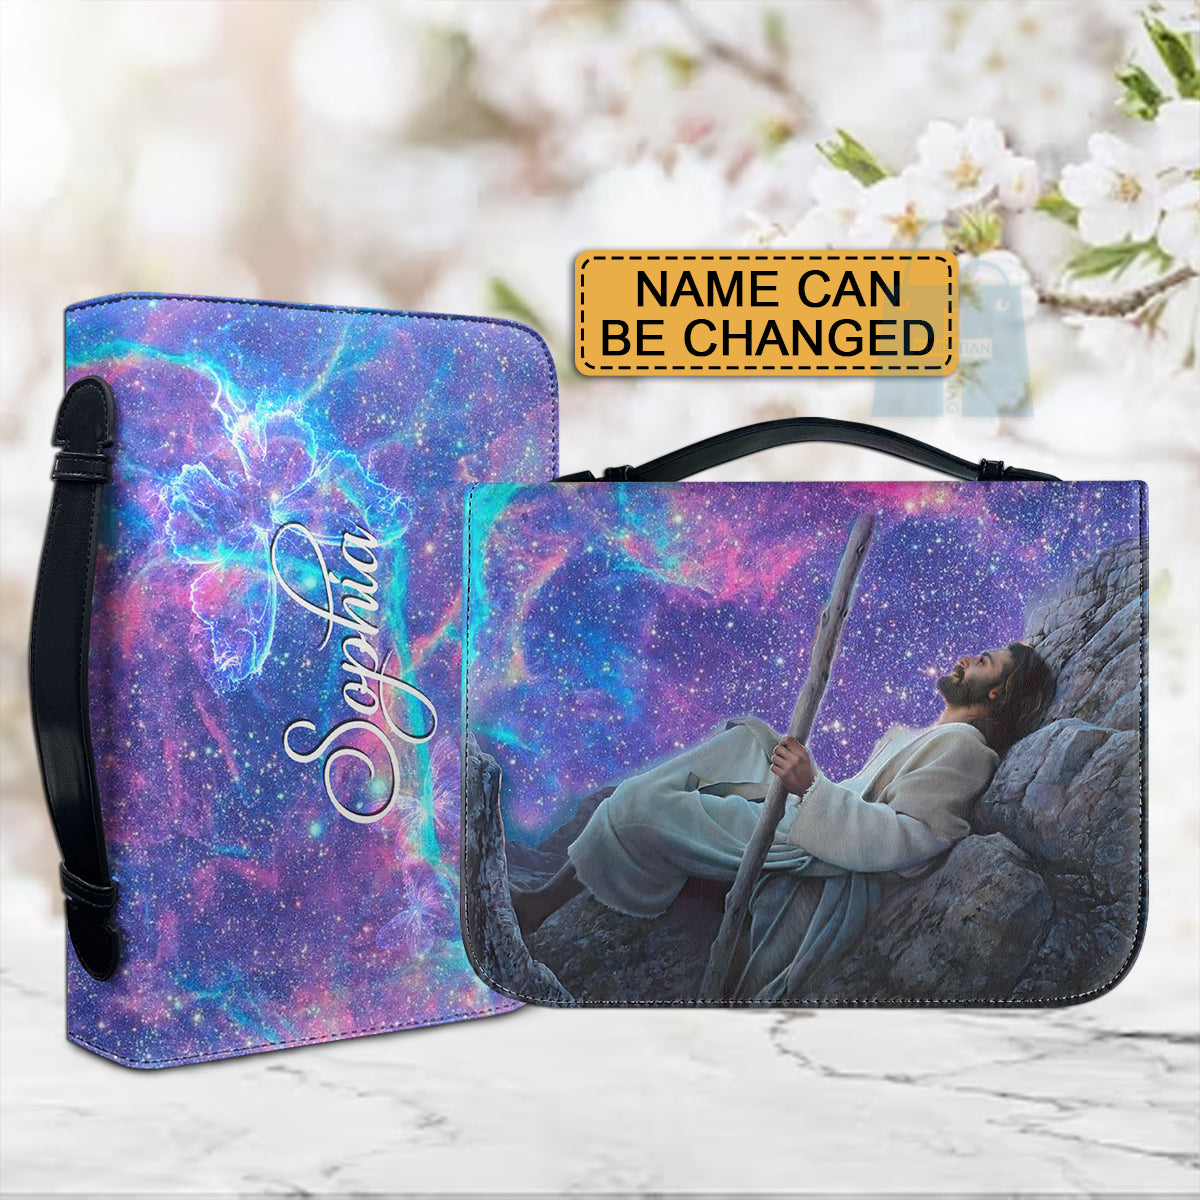 Christianartbag Bible Cover, God Reclines Amidst The Galaxies Bible Cover, Personalized Bible Cover, Galaxies Bible Cover, Christian Gifts, CAB01120124. - Christian Art Bag